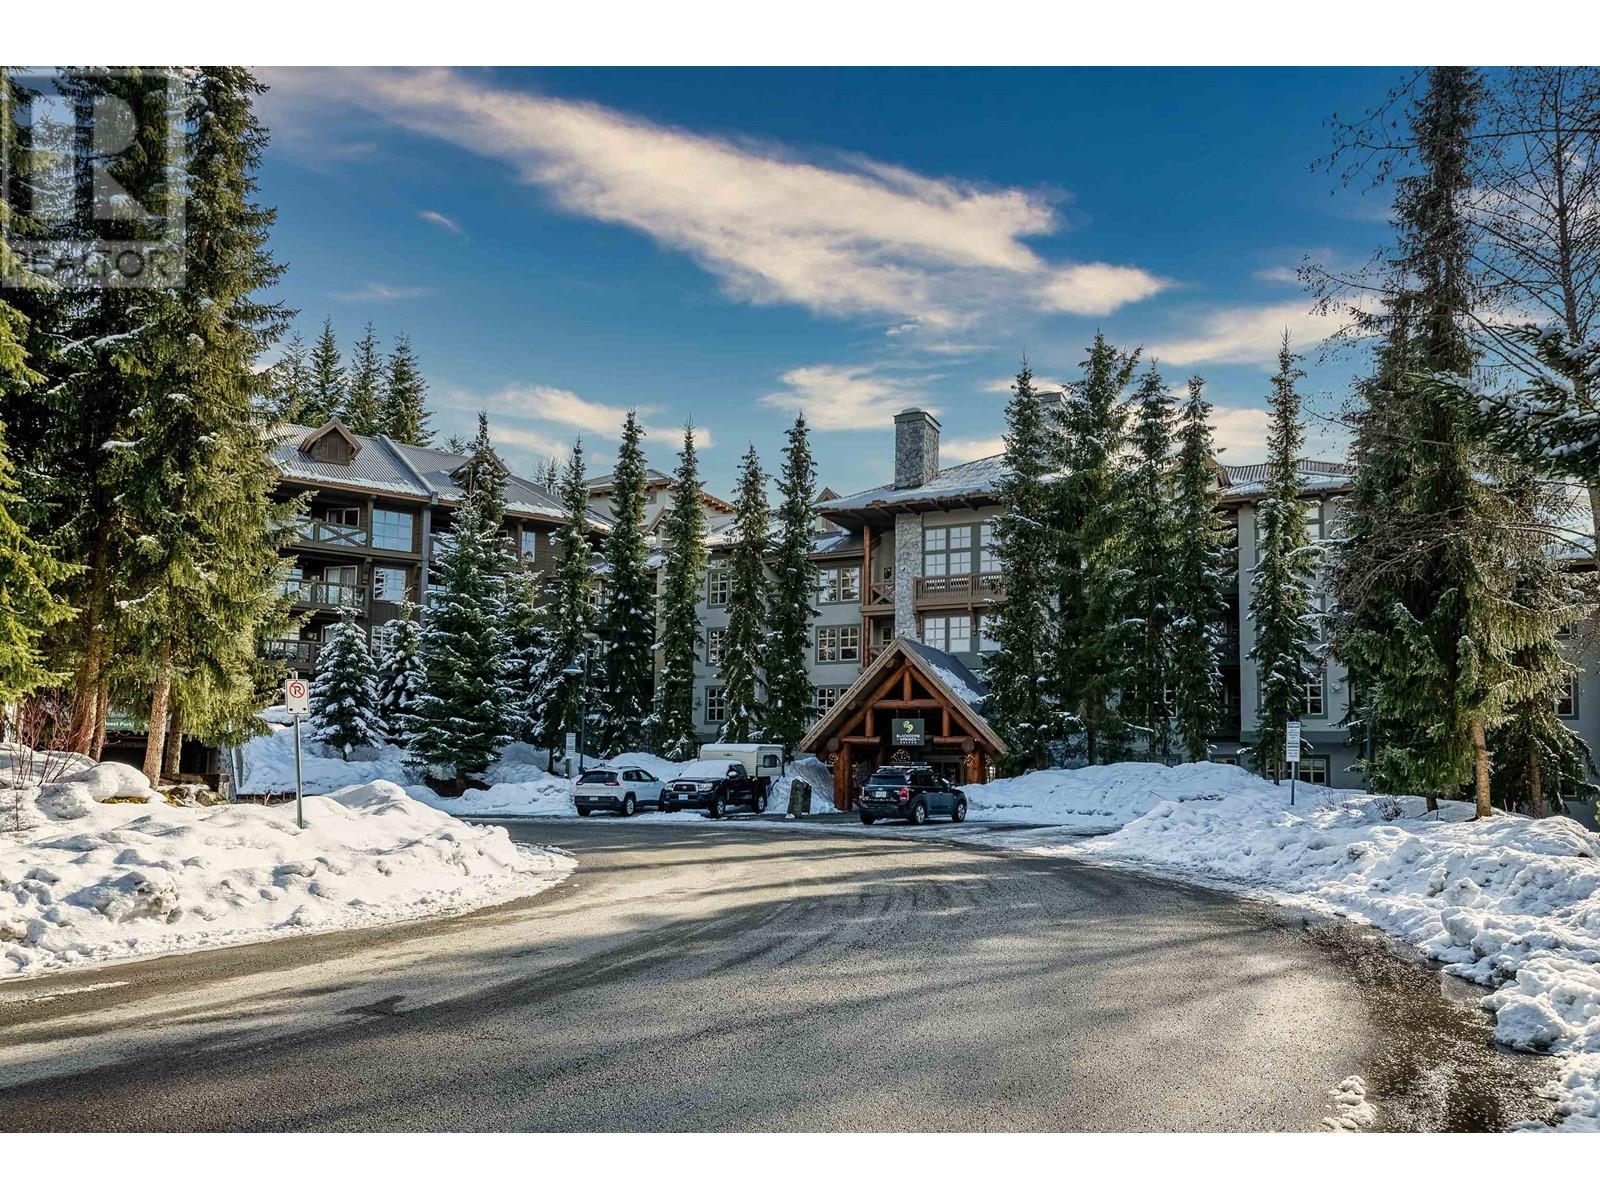 615 4899 PAINTED CLIFF ROAD, whistler, British Columbia